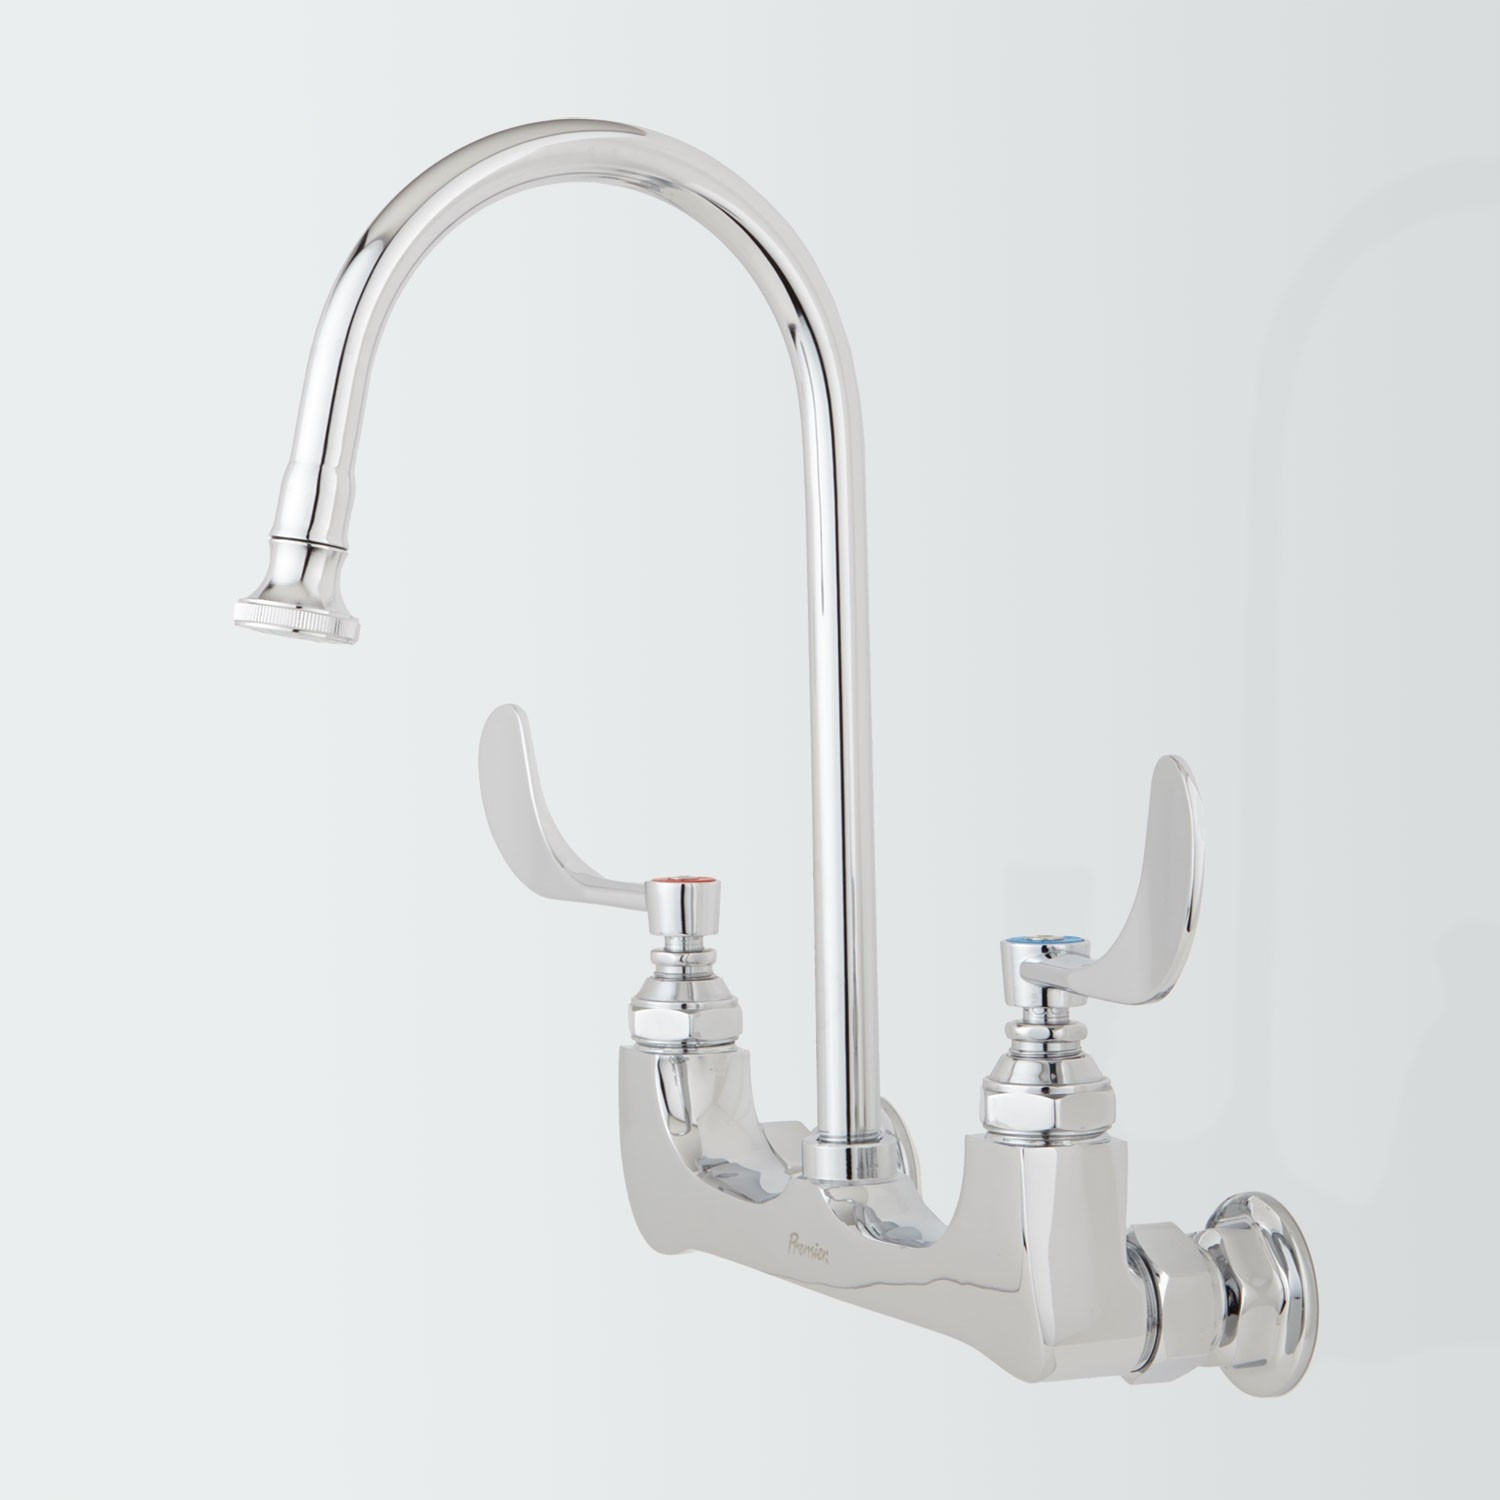 Delta Wall Mounted Kitchen Faucet
 Delta Wall Mount Kitchen Faucet With Sprayer